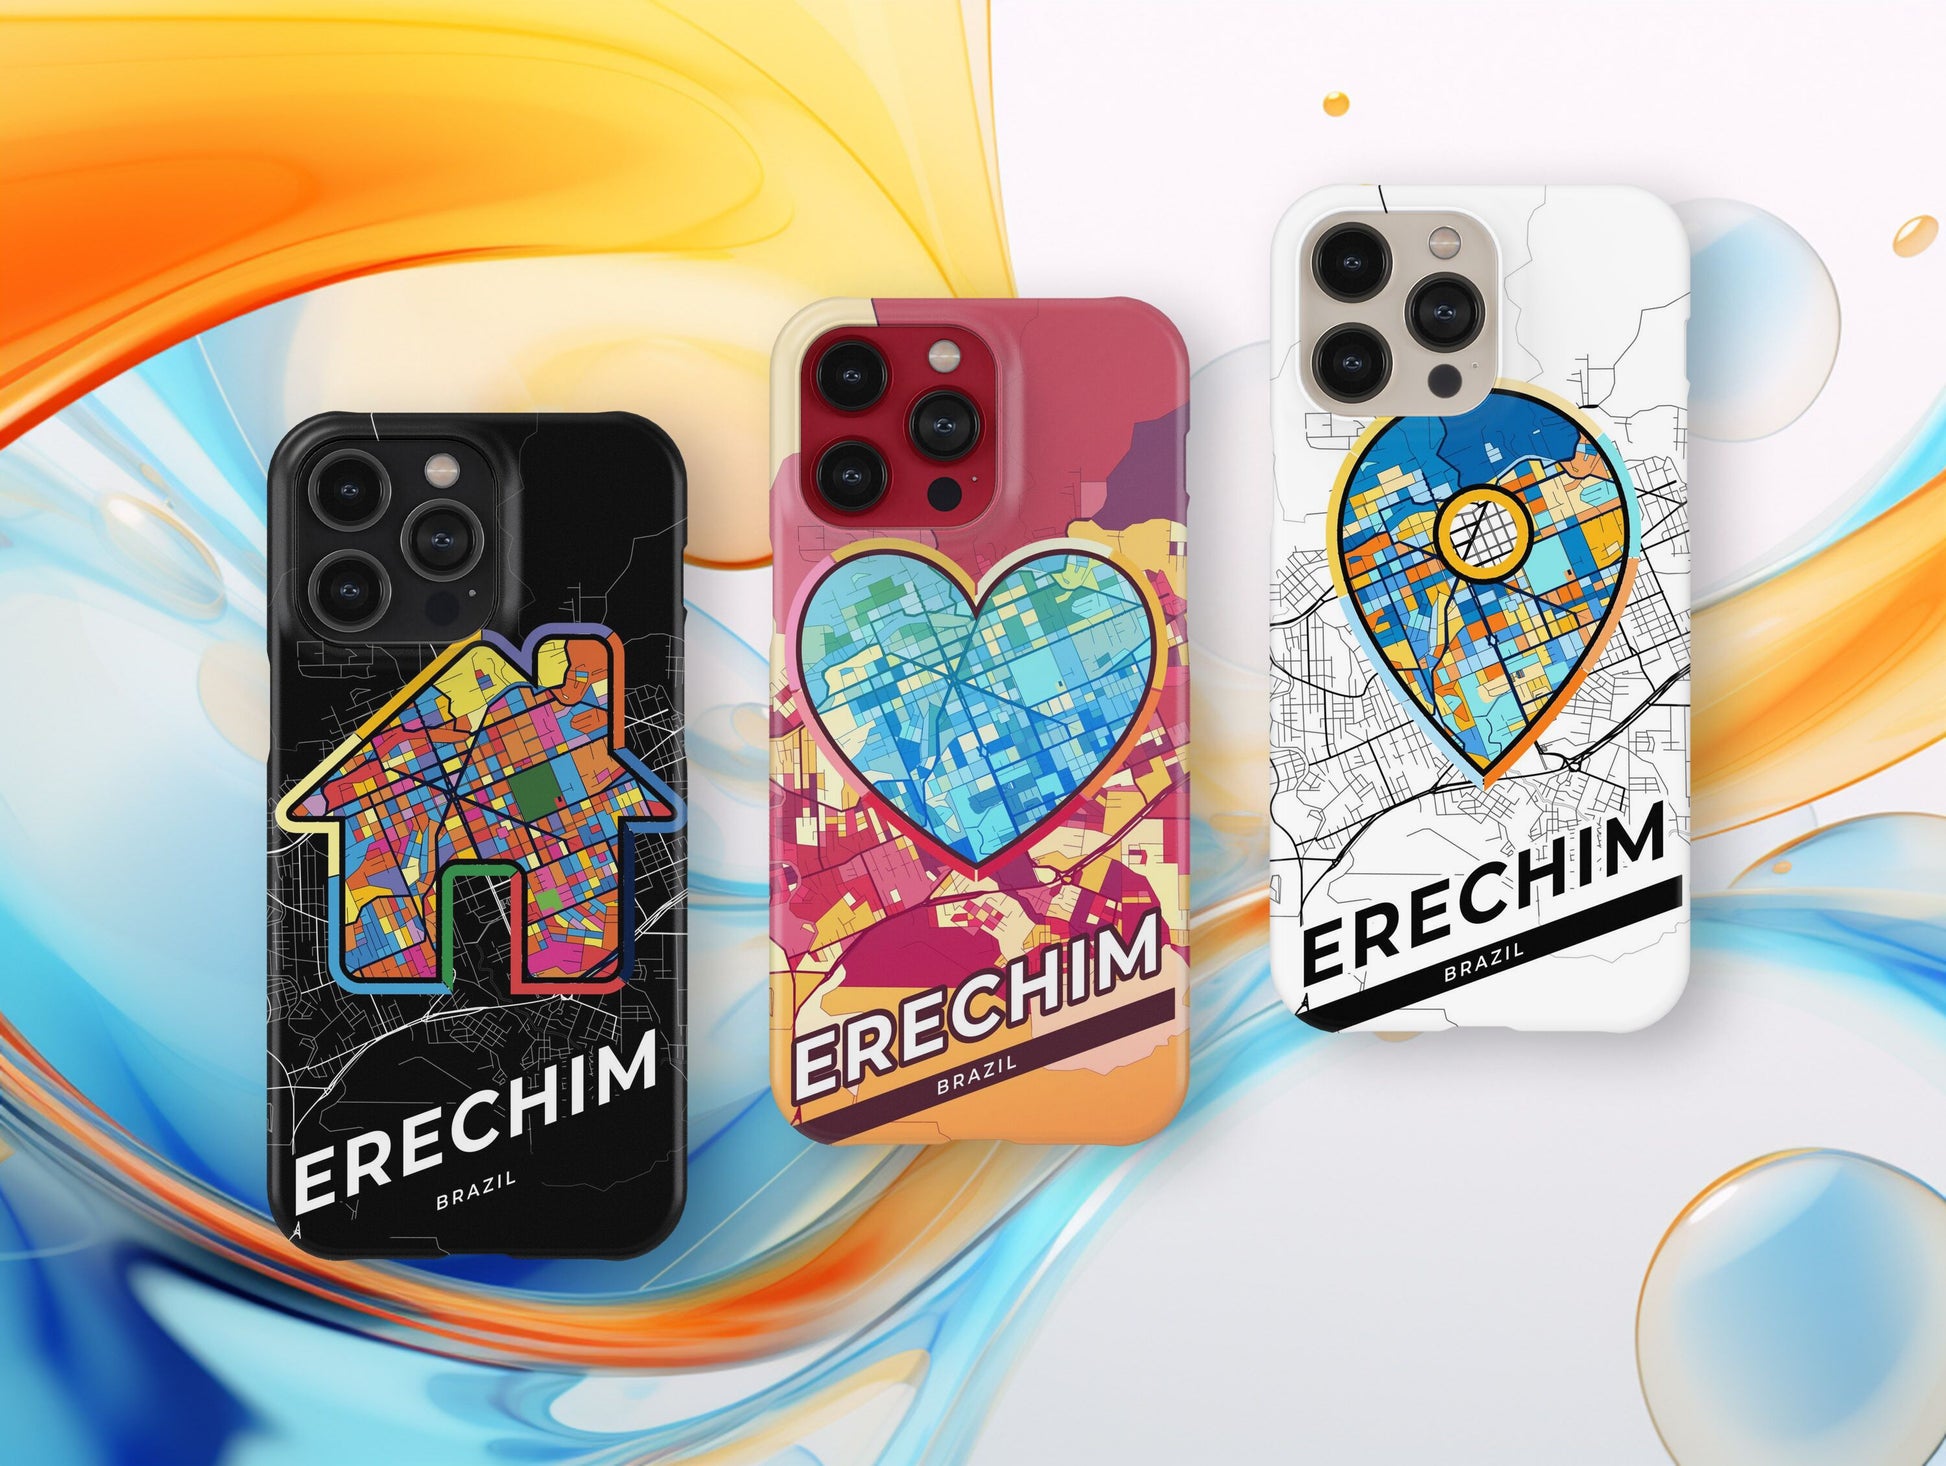 Erechim Brazil slim phone case with colorful icon. Birthday, wedding or housewarming gift. Couple match cases.